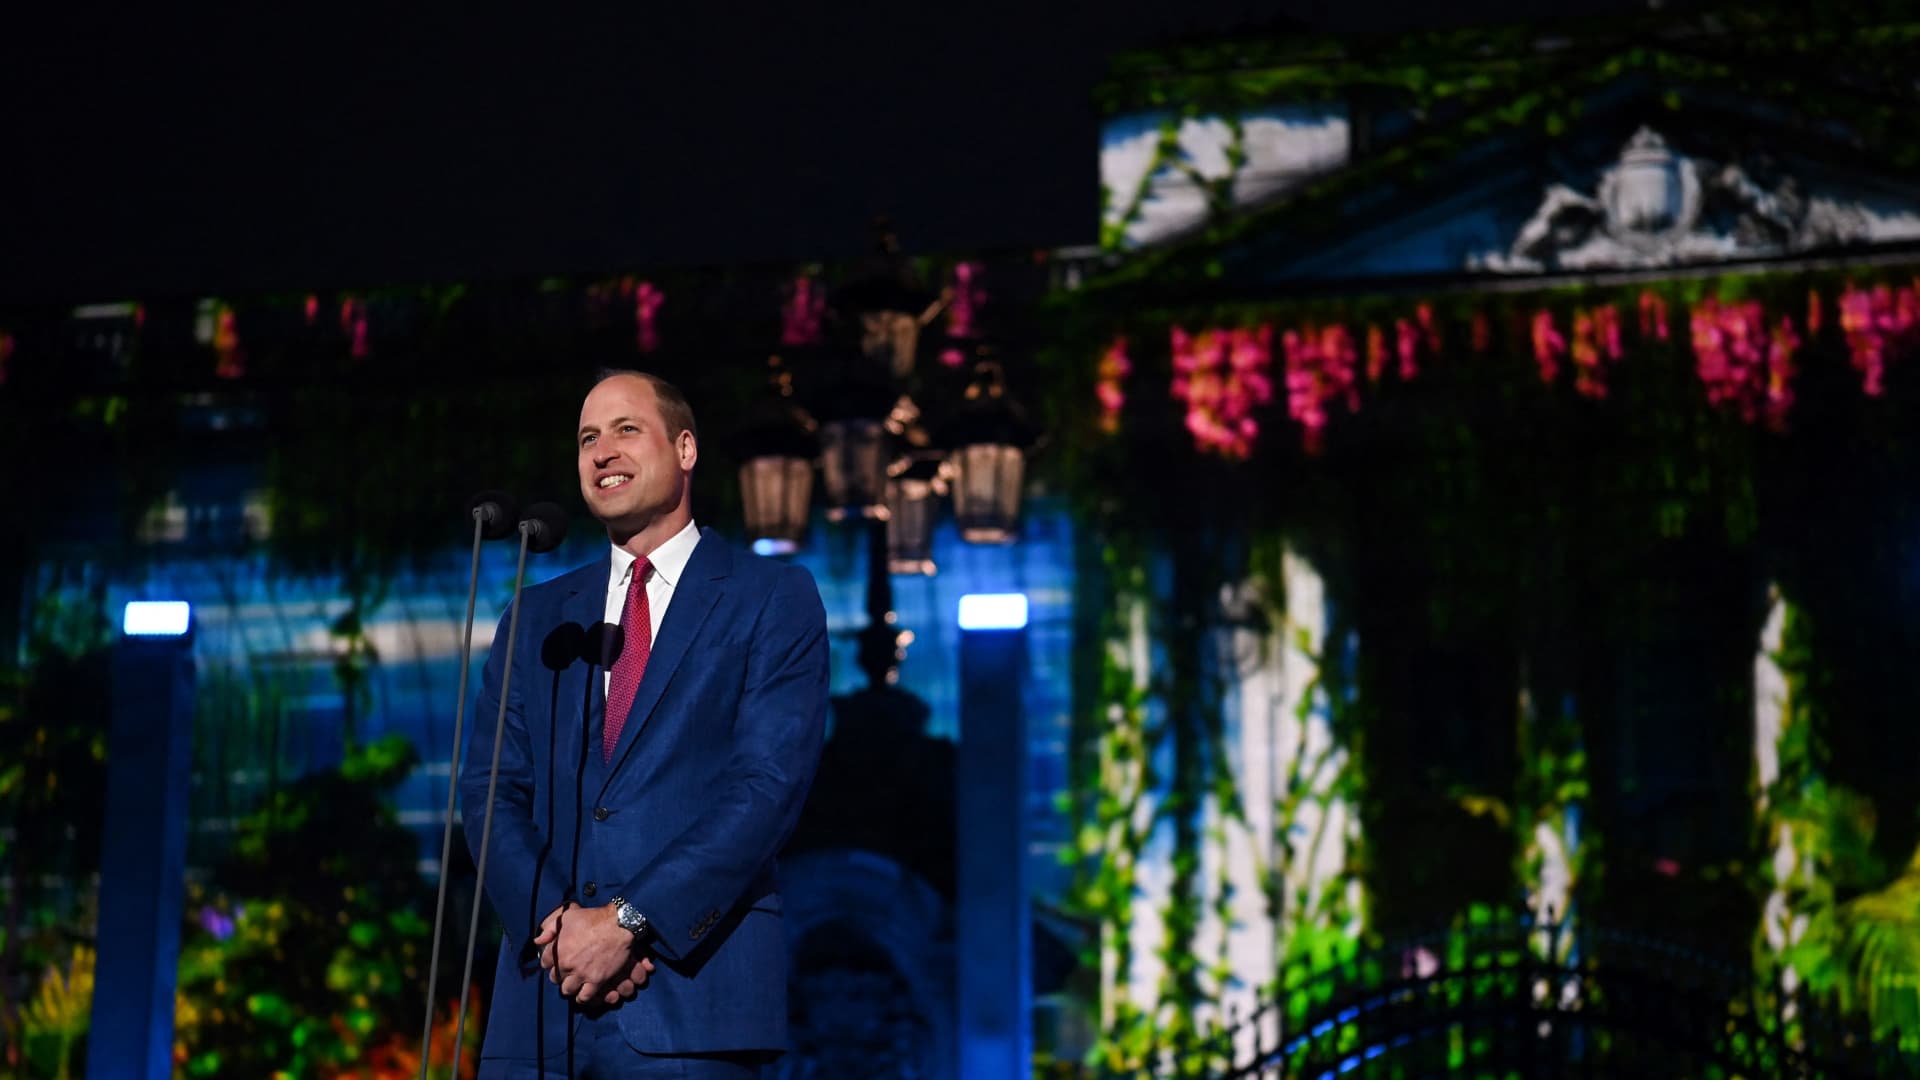 ‘There is hope’: Prince William in rallying cry for the environment